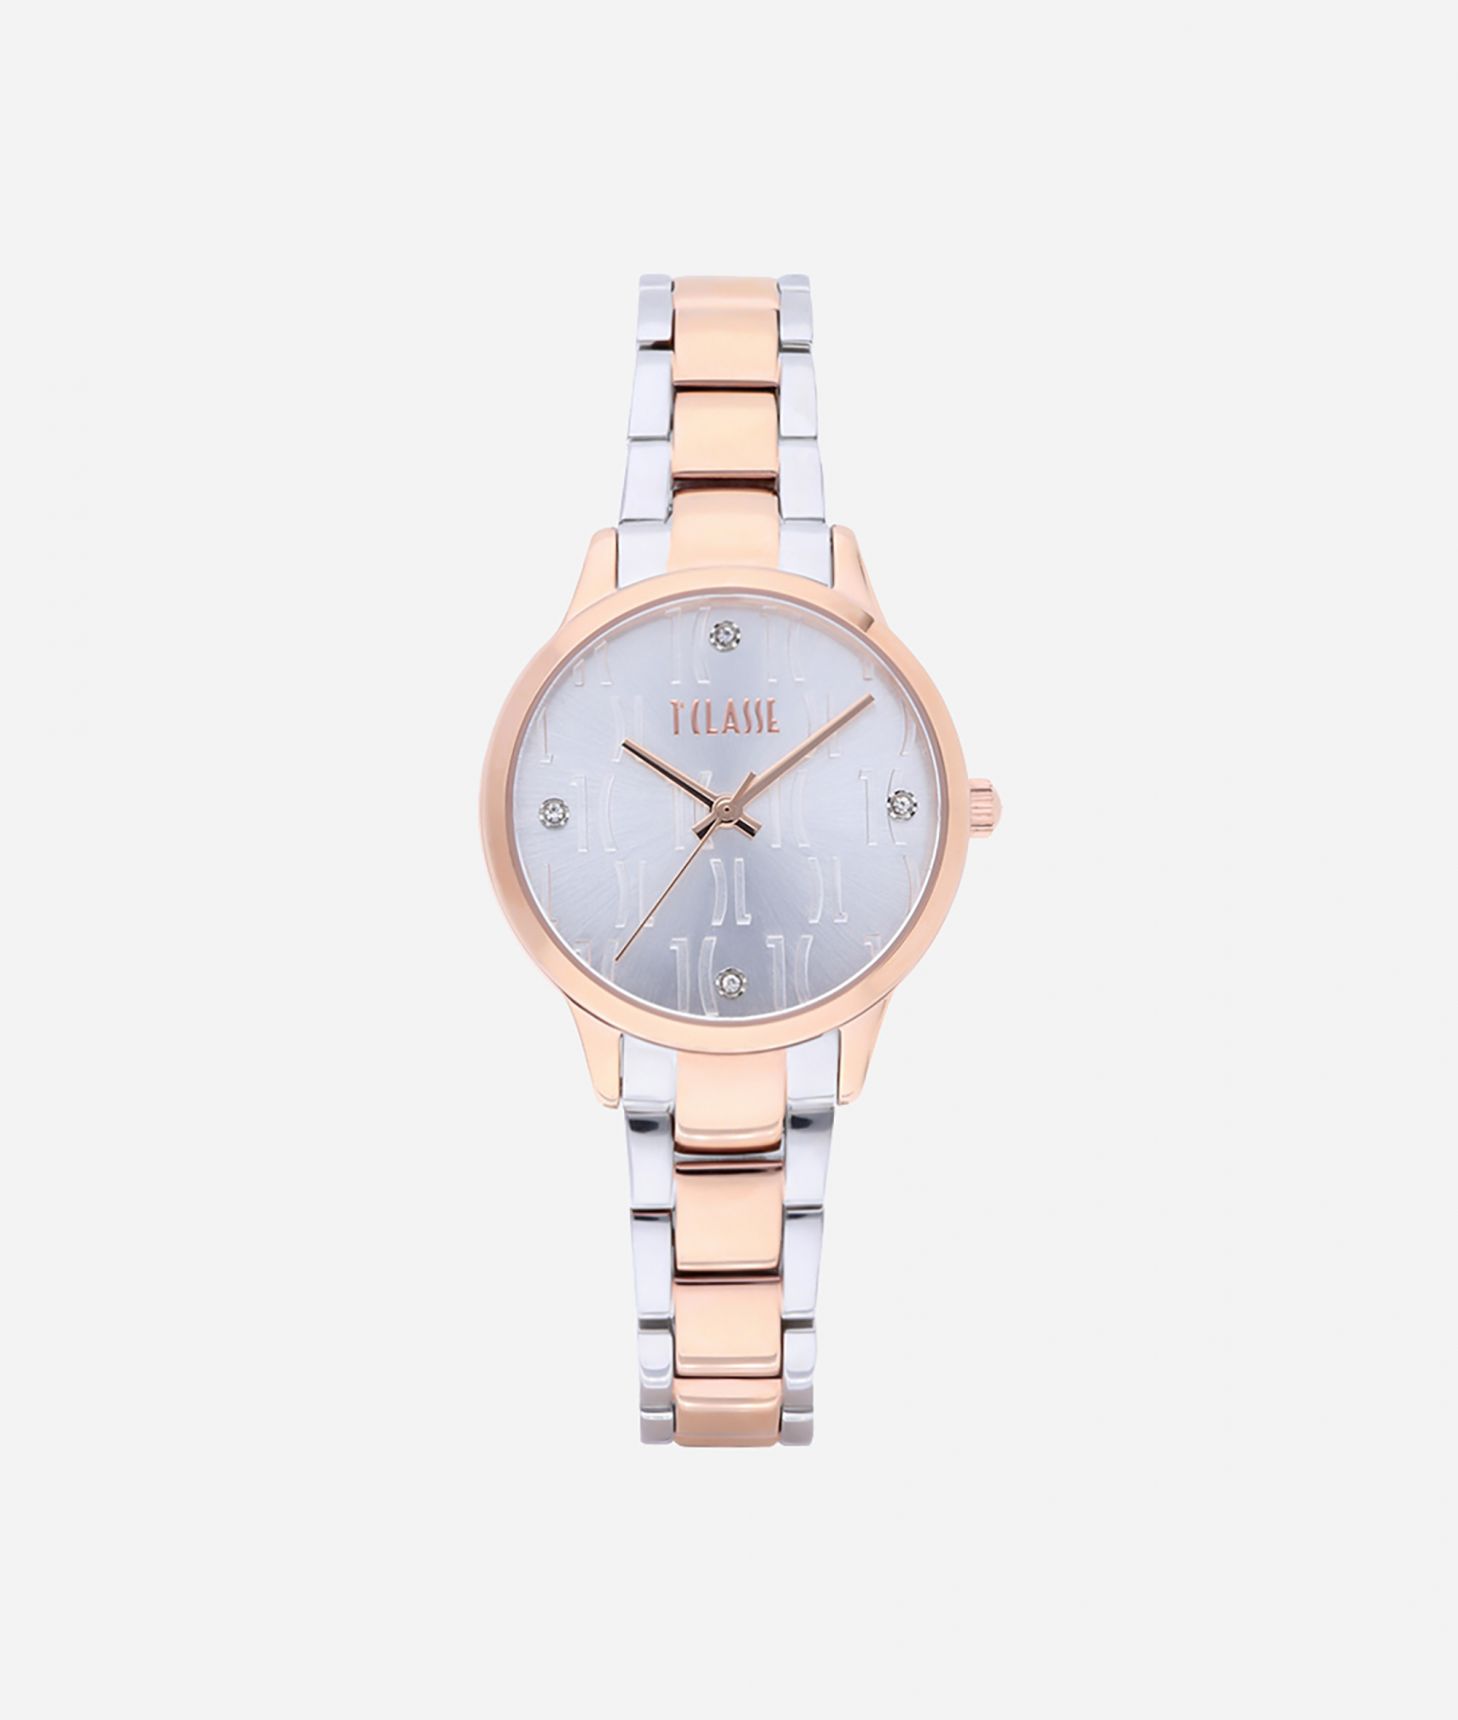 Formentera Bicolor stainless steel watch Silver and Rose Gold,front